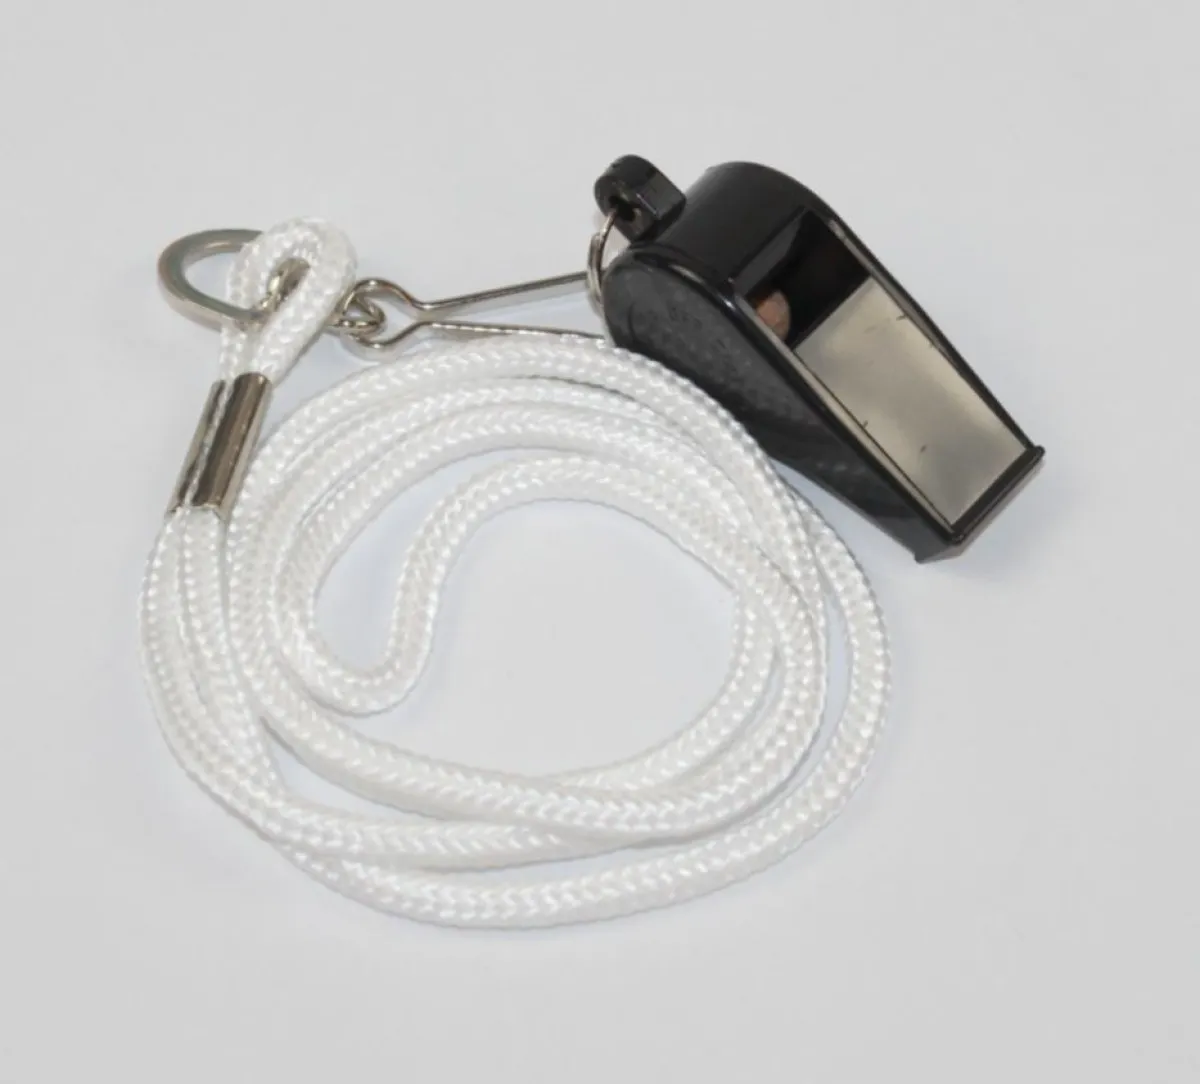 Plastic whistle with white band